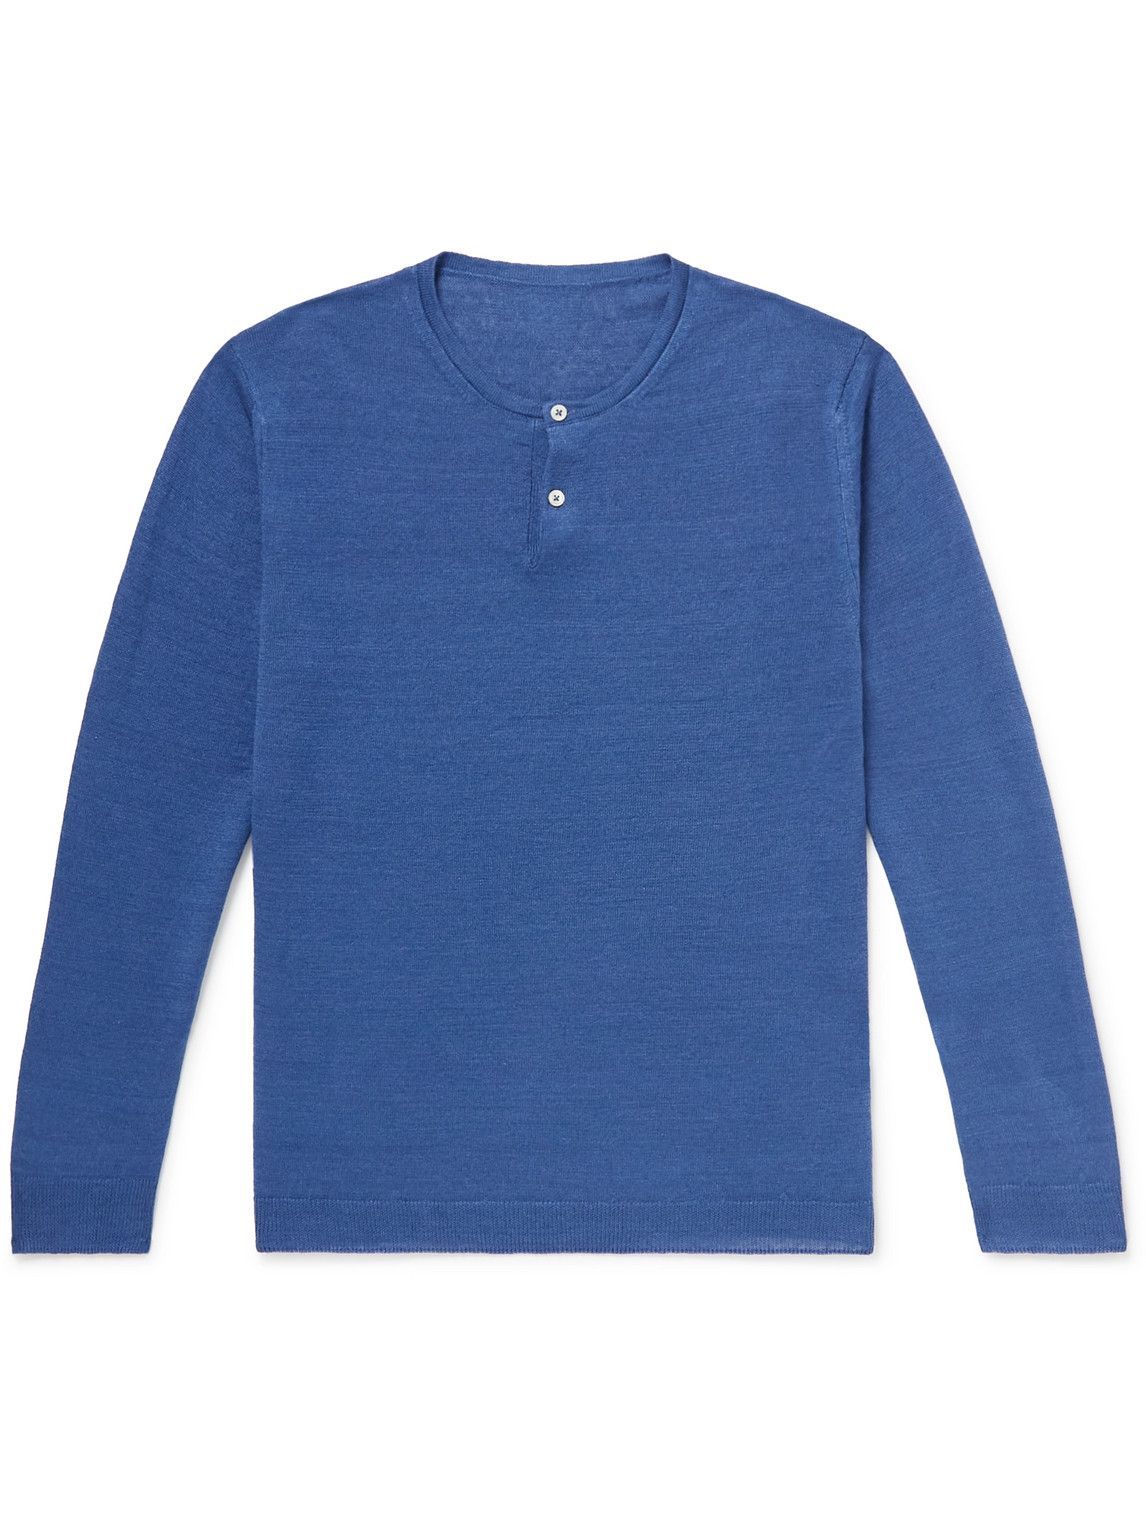 Anderson & Sheppard - Knitted Linen Henley T-Shirt - Blue Anderson ...